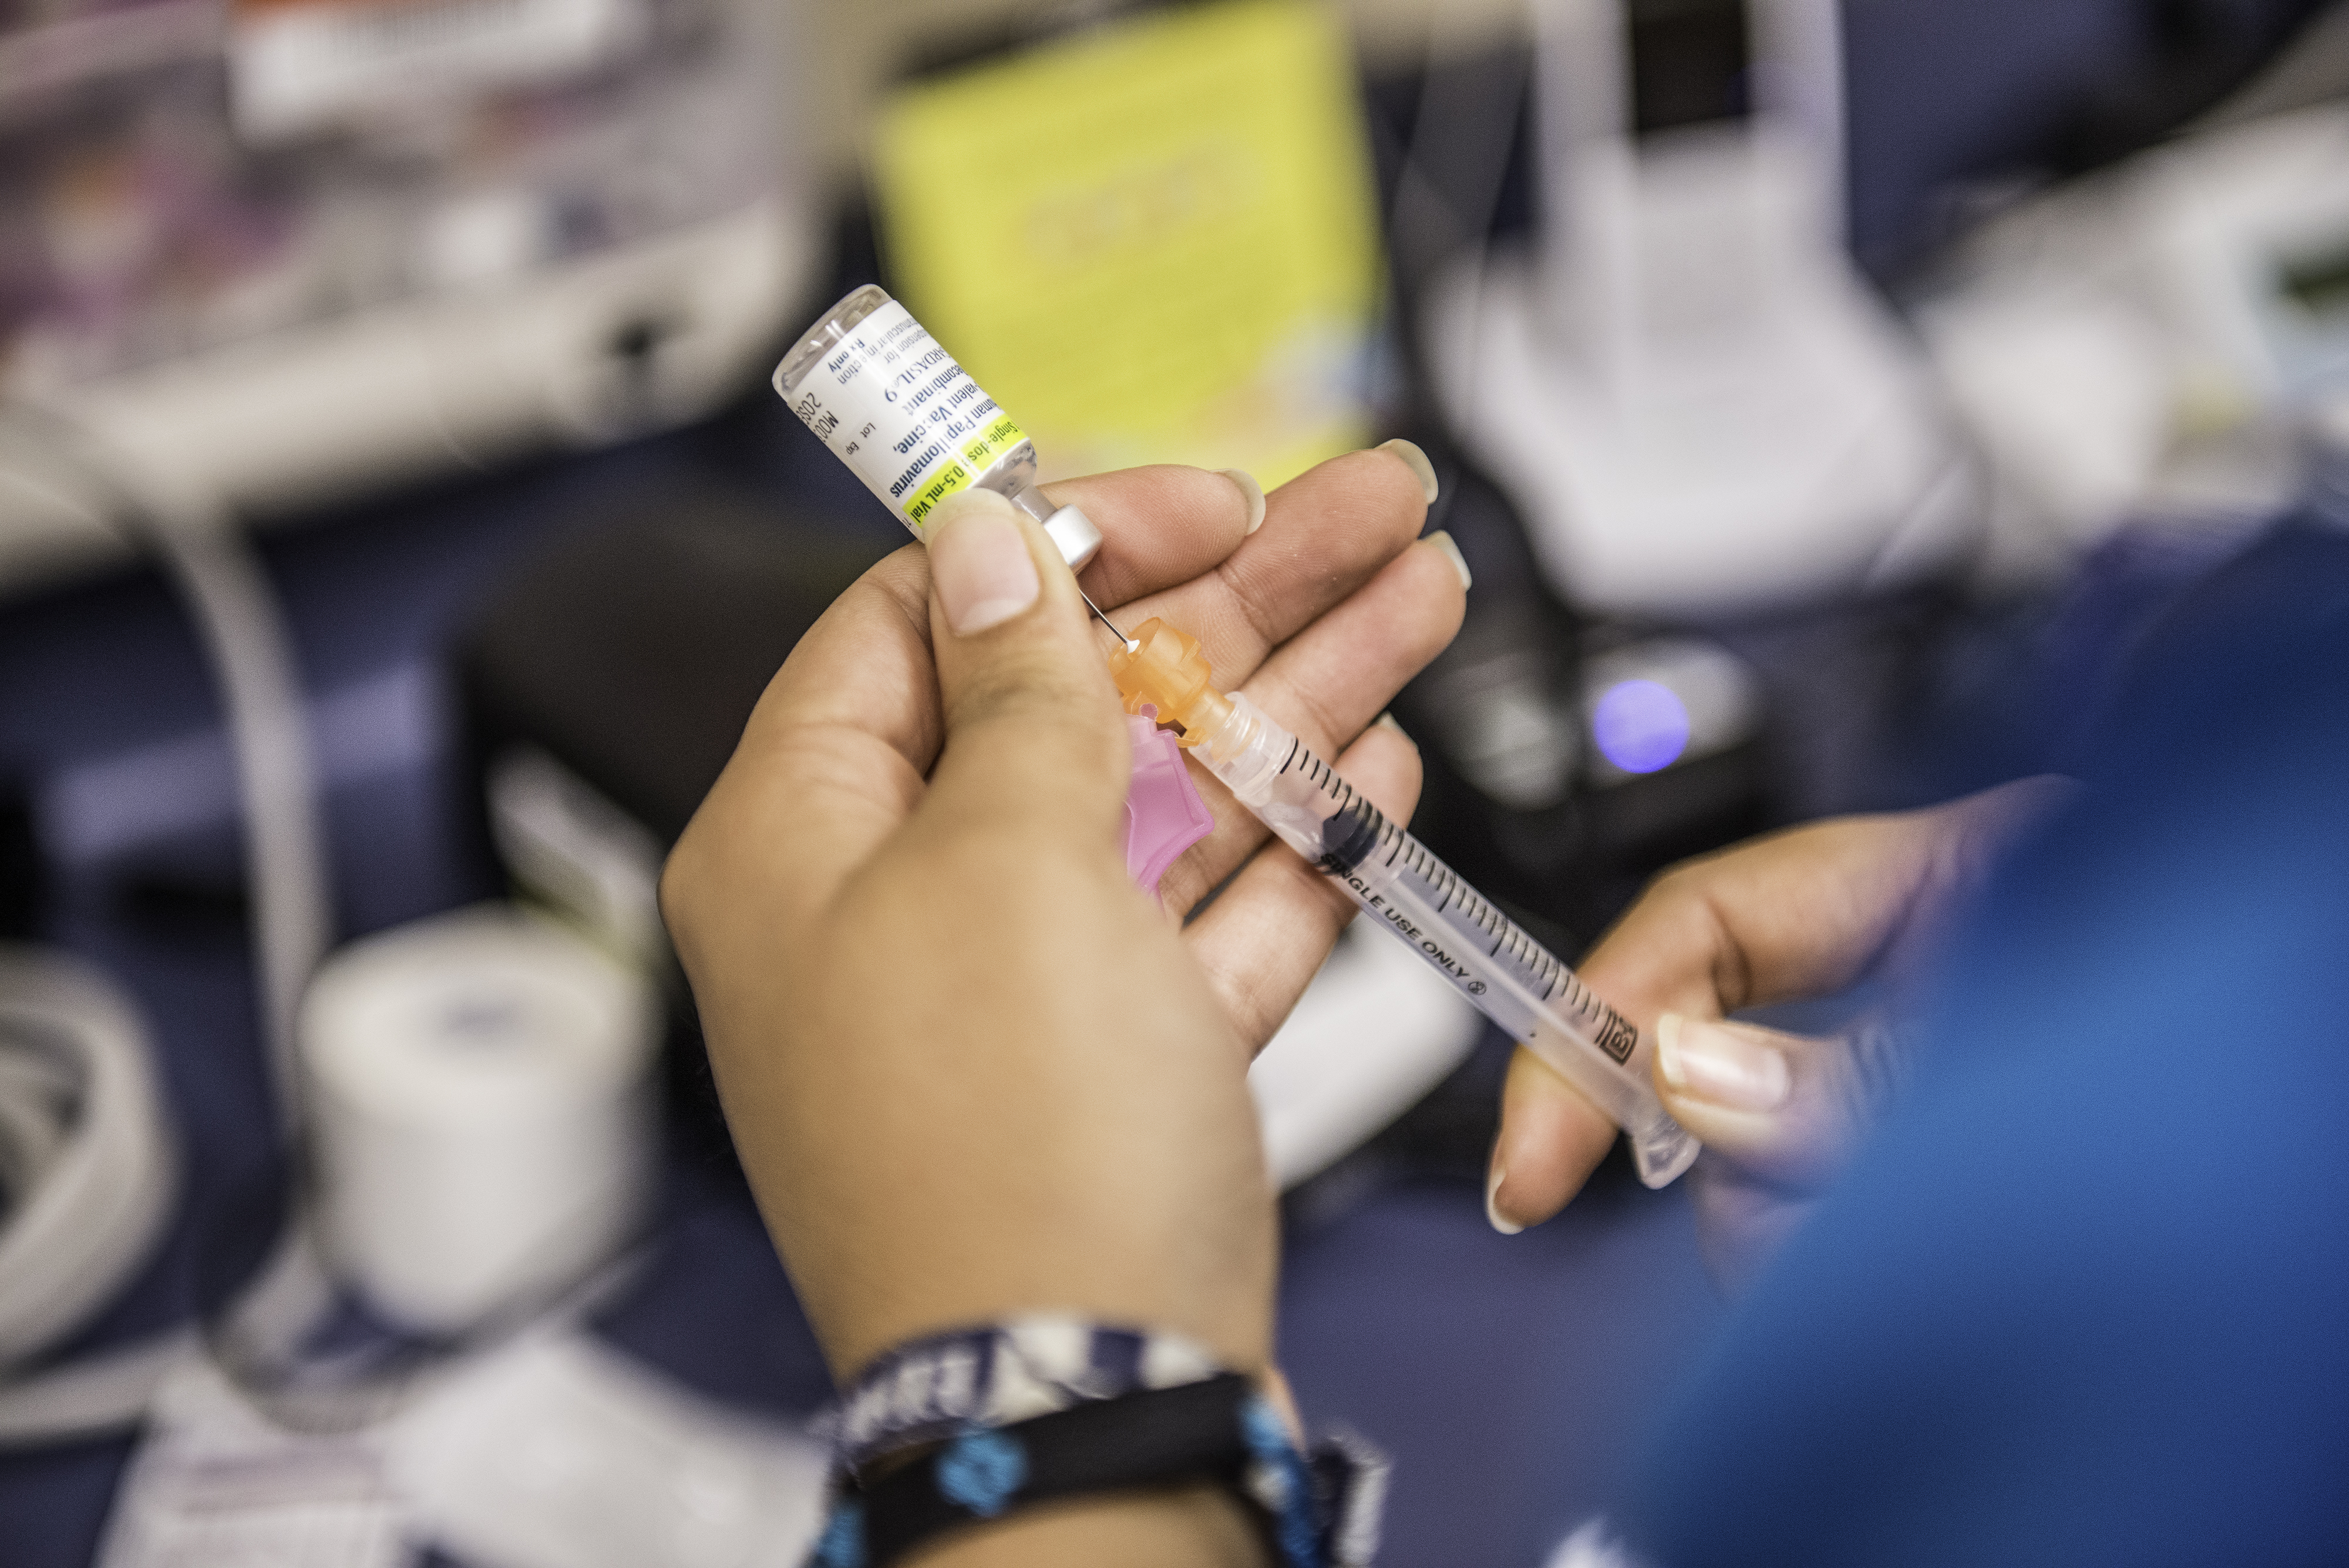 A medical assistant fills a needle with the drug Gardasil, used for HPV vaccinations, at Amistad Community Health Center in Corpus Christi, Texas on Friday May 27, 2016. (The Washington Post&mdash;The Washington Post/Getty Images)